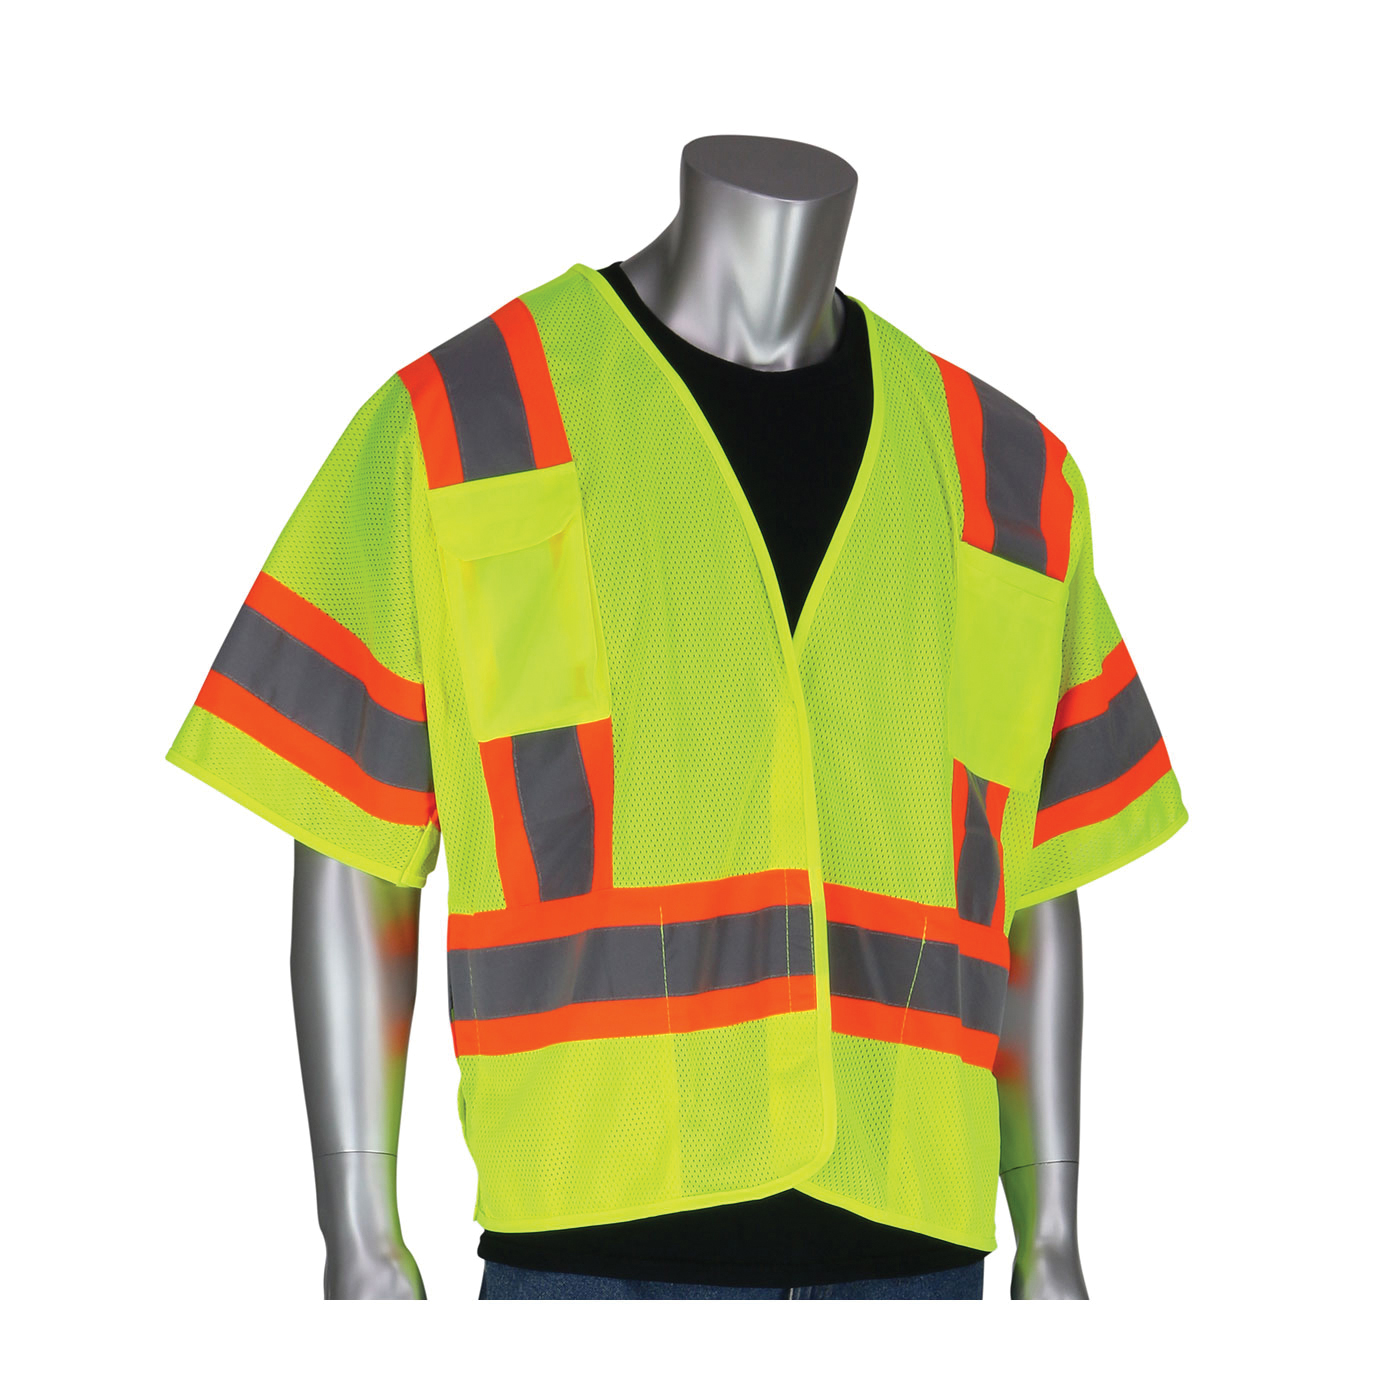 PIP® 303-5PMTT-LY/M 2-Tone Safety Vest, M, Hi-Viz Lime Yellow, Polyester Mesh, Hook and Loop Closure, 4 Pockets, ANSI Class: Class 3, Specifications Met: ANSI 107 Type R